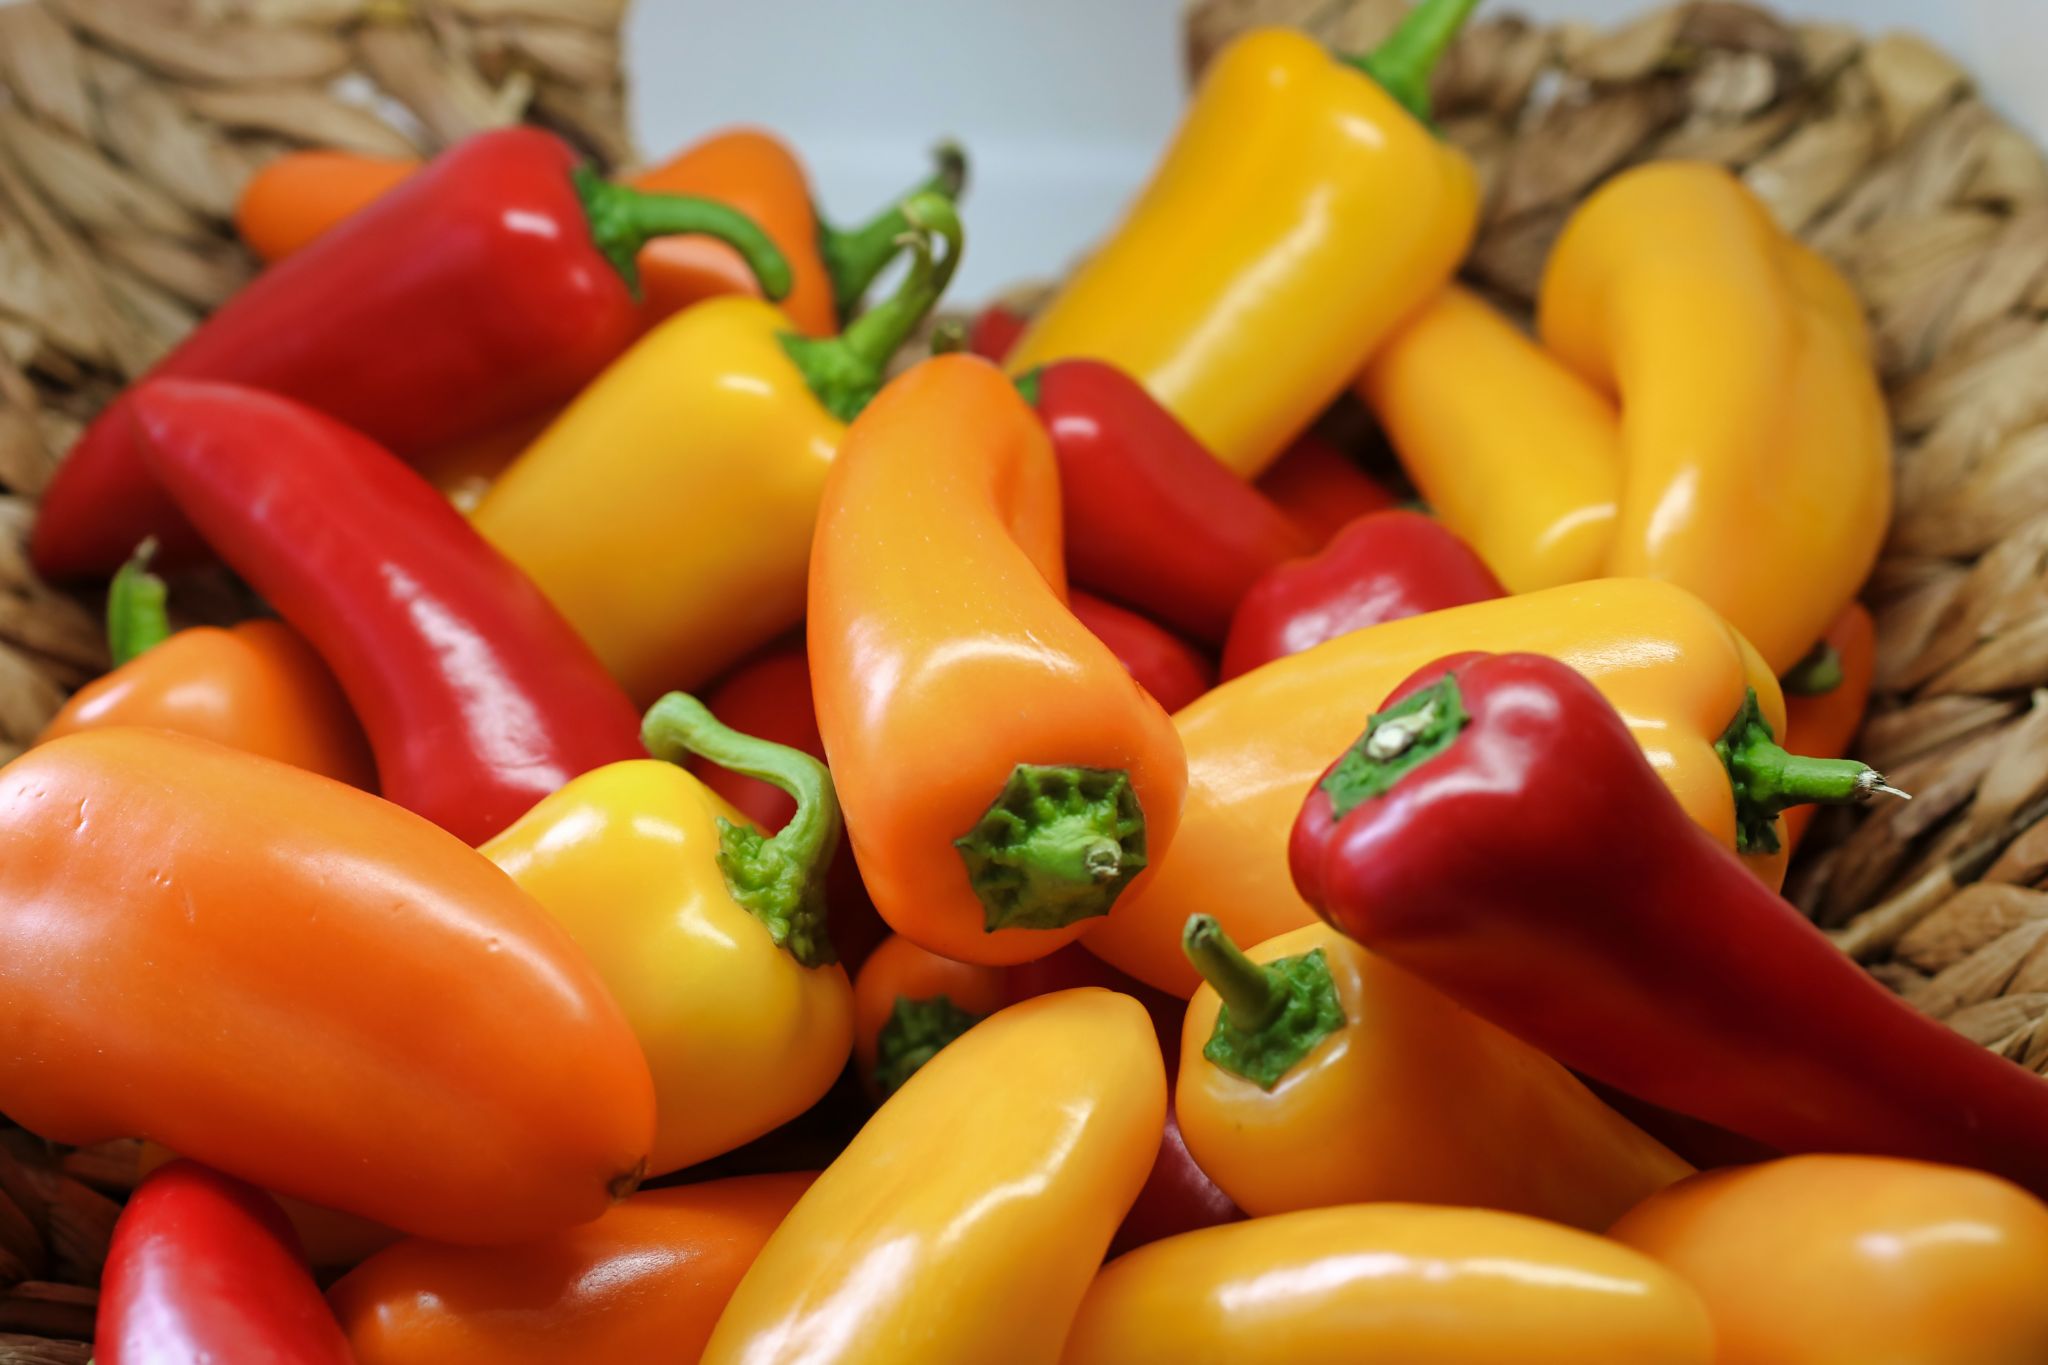 Can Rabbits Eat Bell Peppers? Pet Care Suggestions